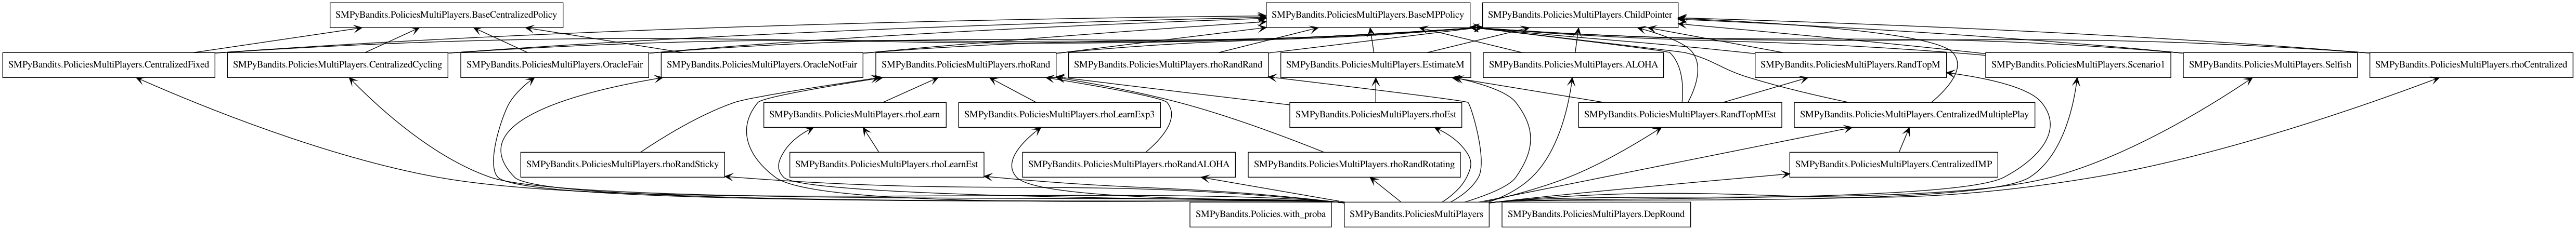 UML Diagram - Package SMPyBandits.PoliciesMultiPlayers.png